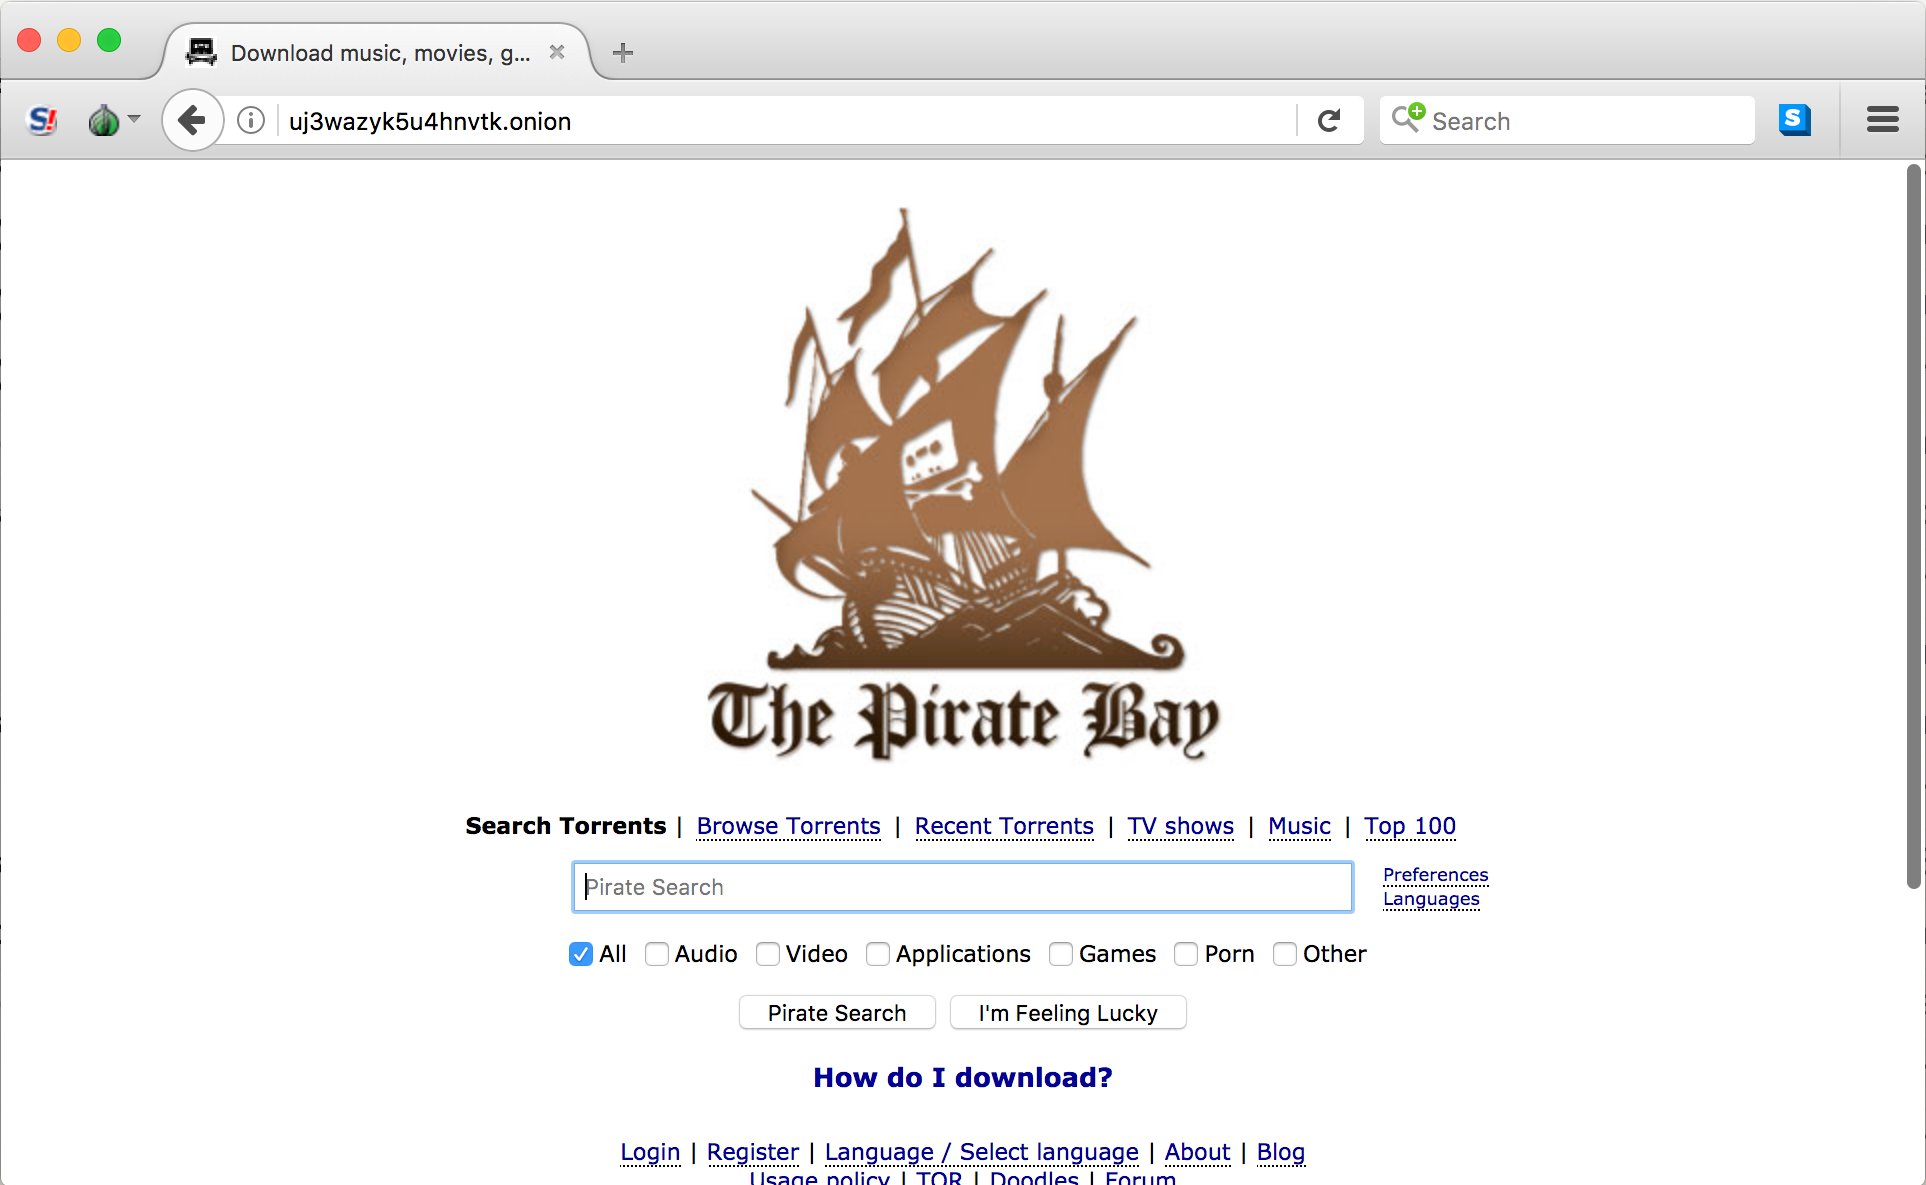 thepiratebay home page from .onion domain